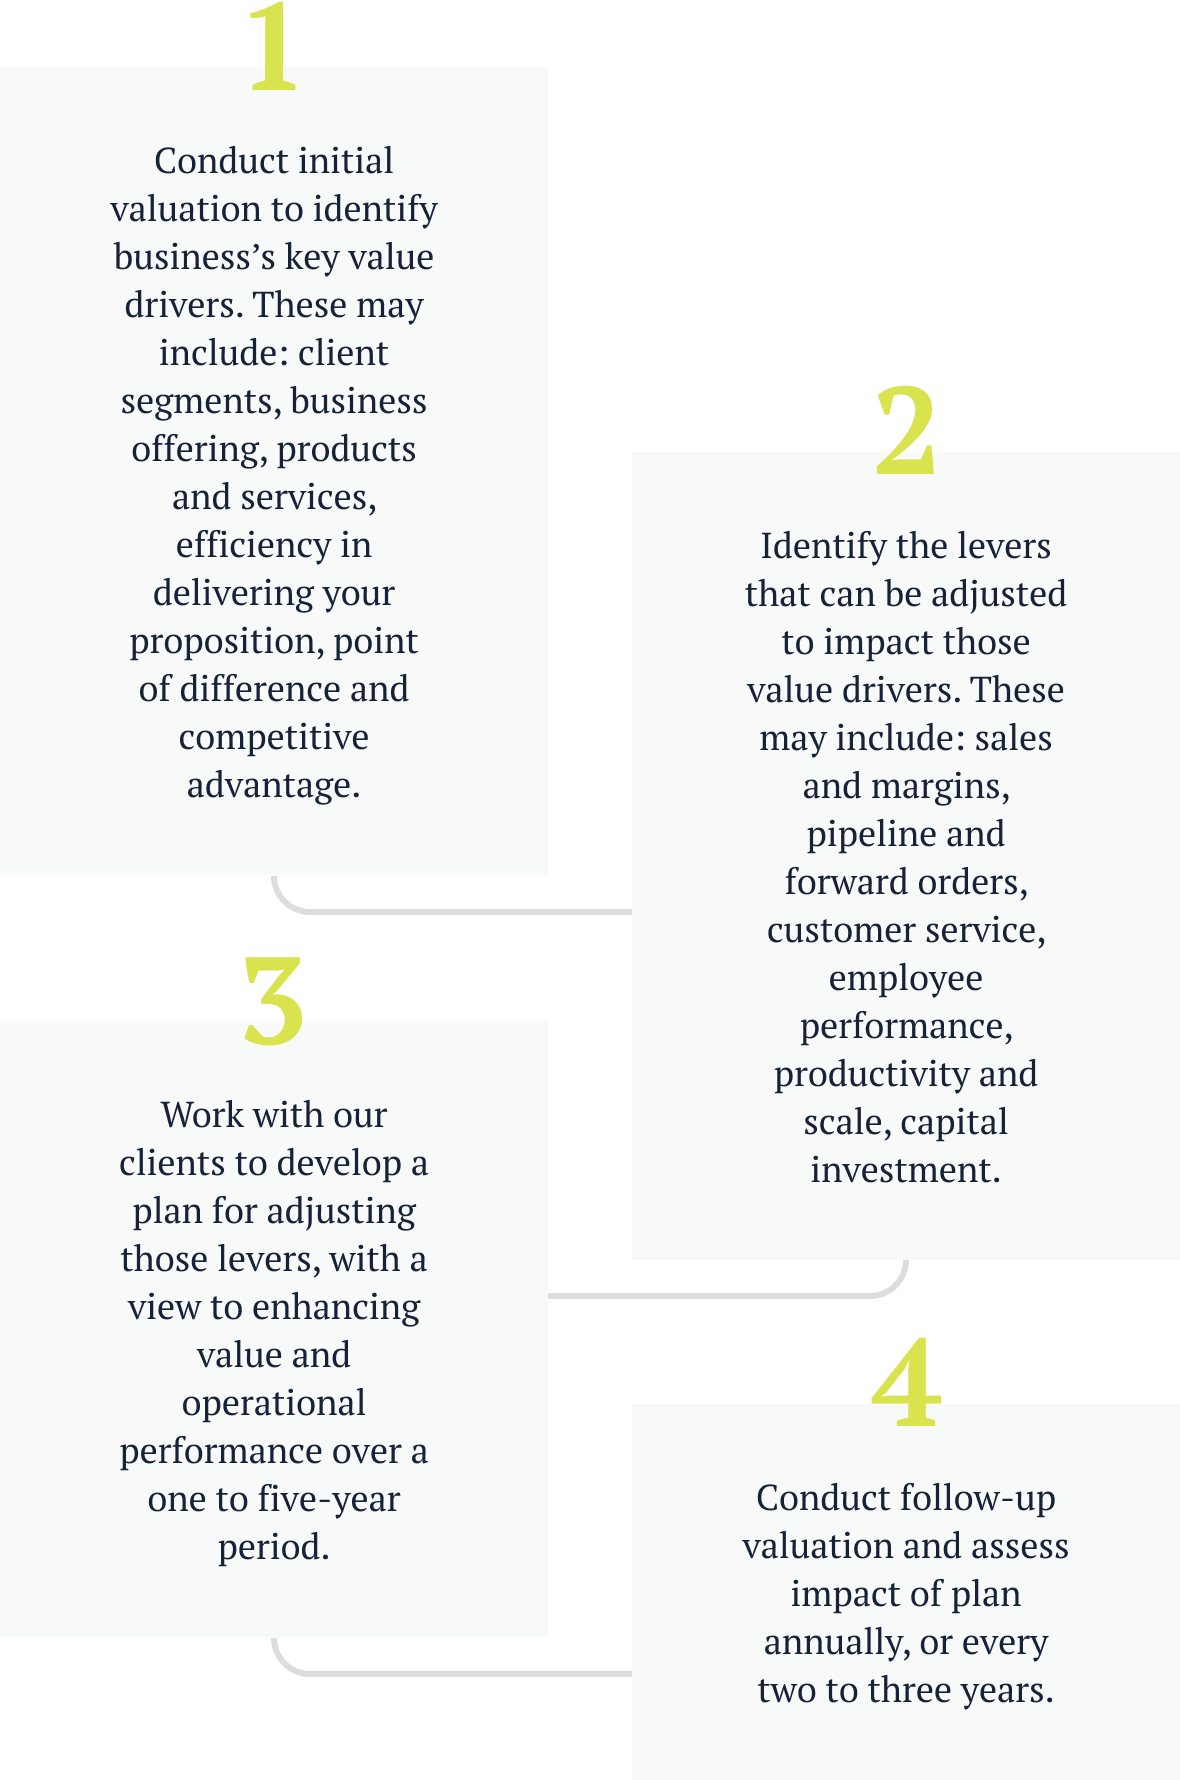 Valuation as a management tool@2x